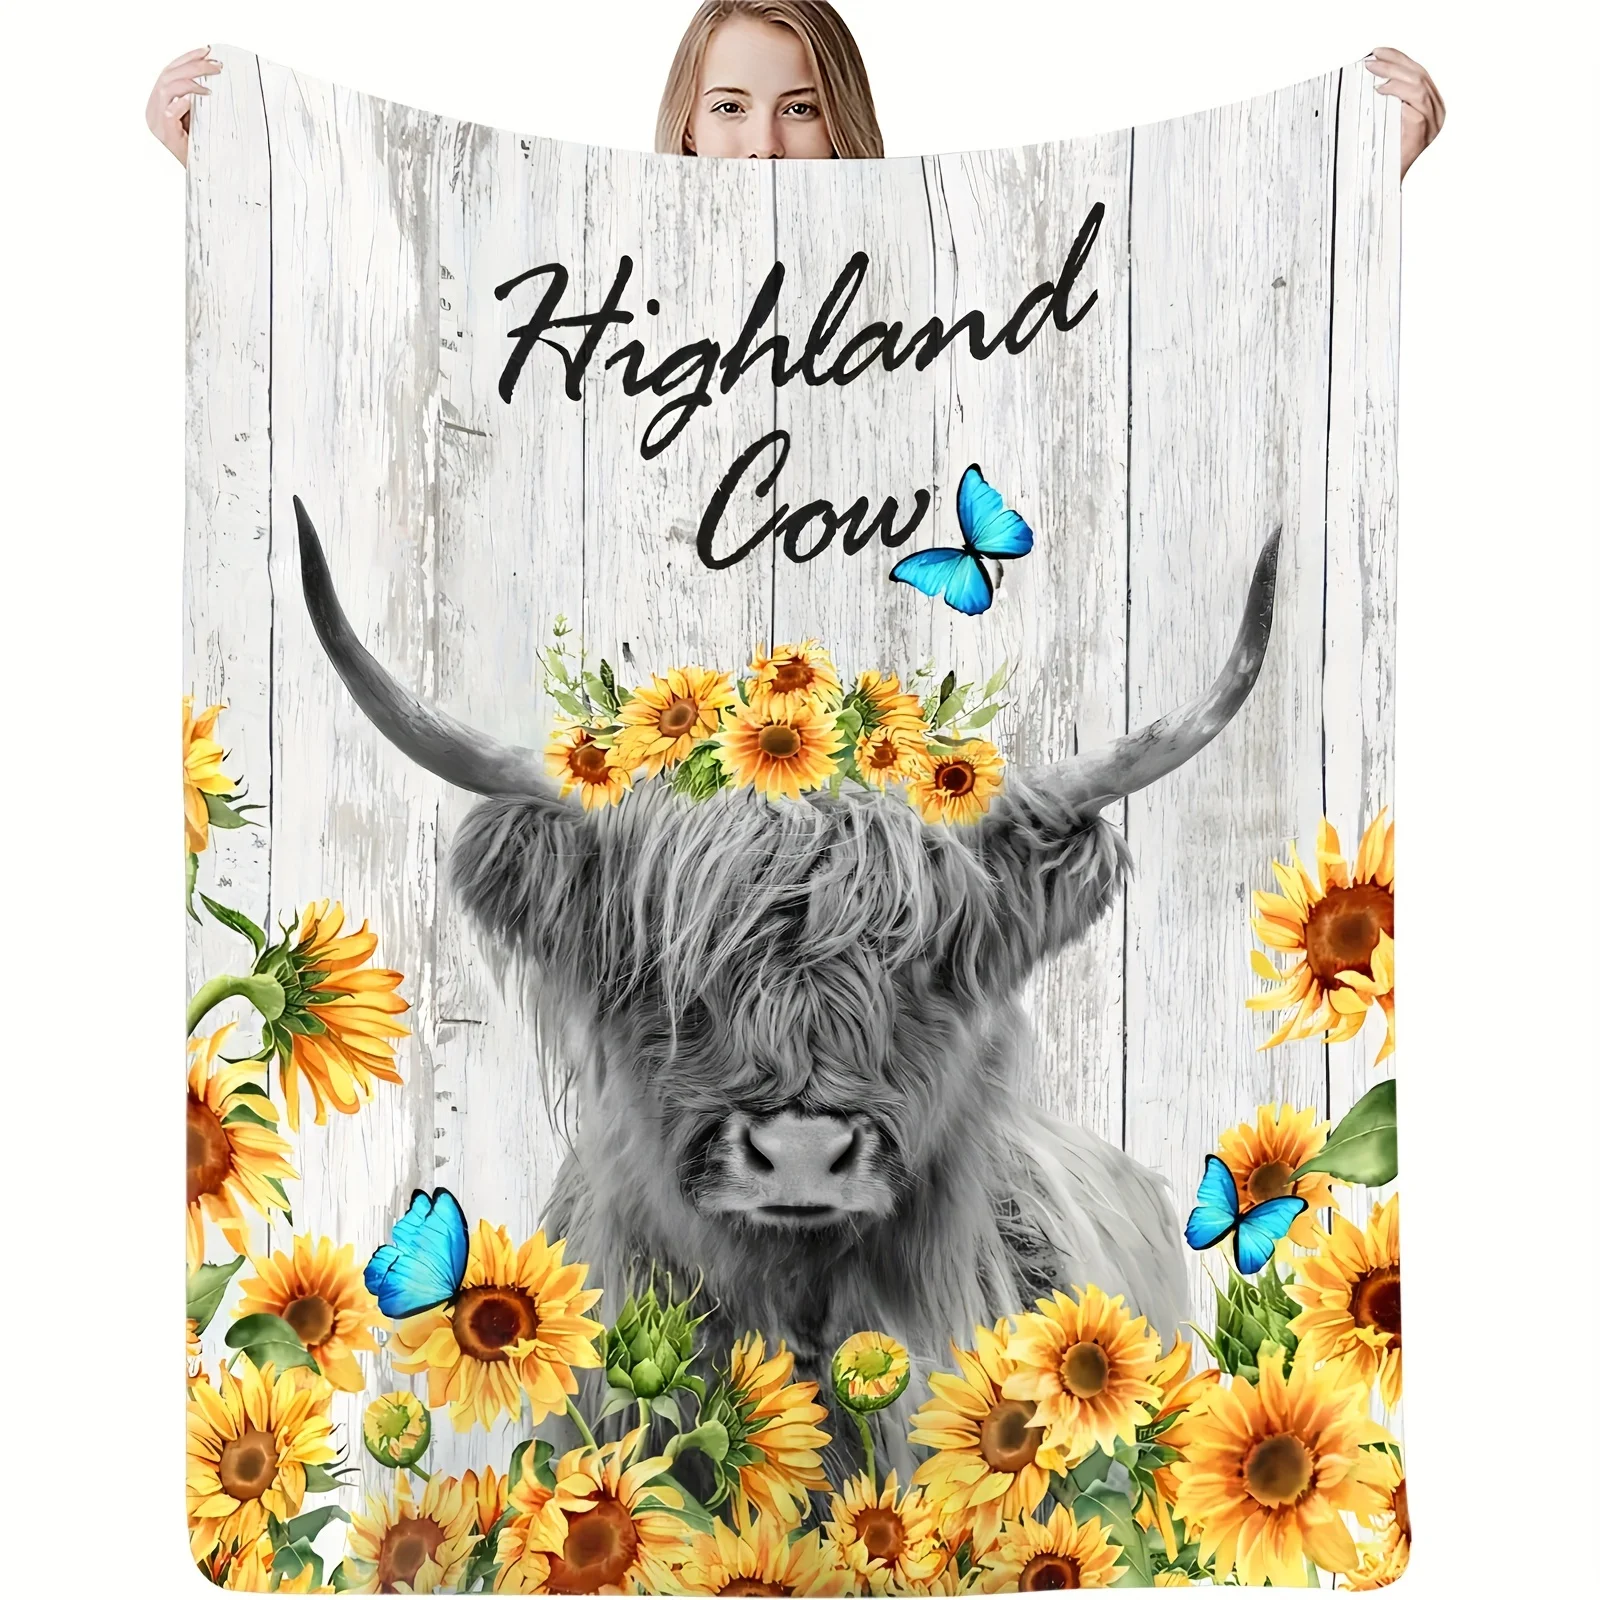 

1pc Highland Cow Sunflower Printed Flannel Blanket, Cozy Soft Throw Blanket For Couch Bed Sofa Camping Travelling